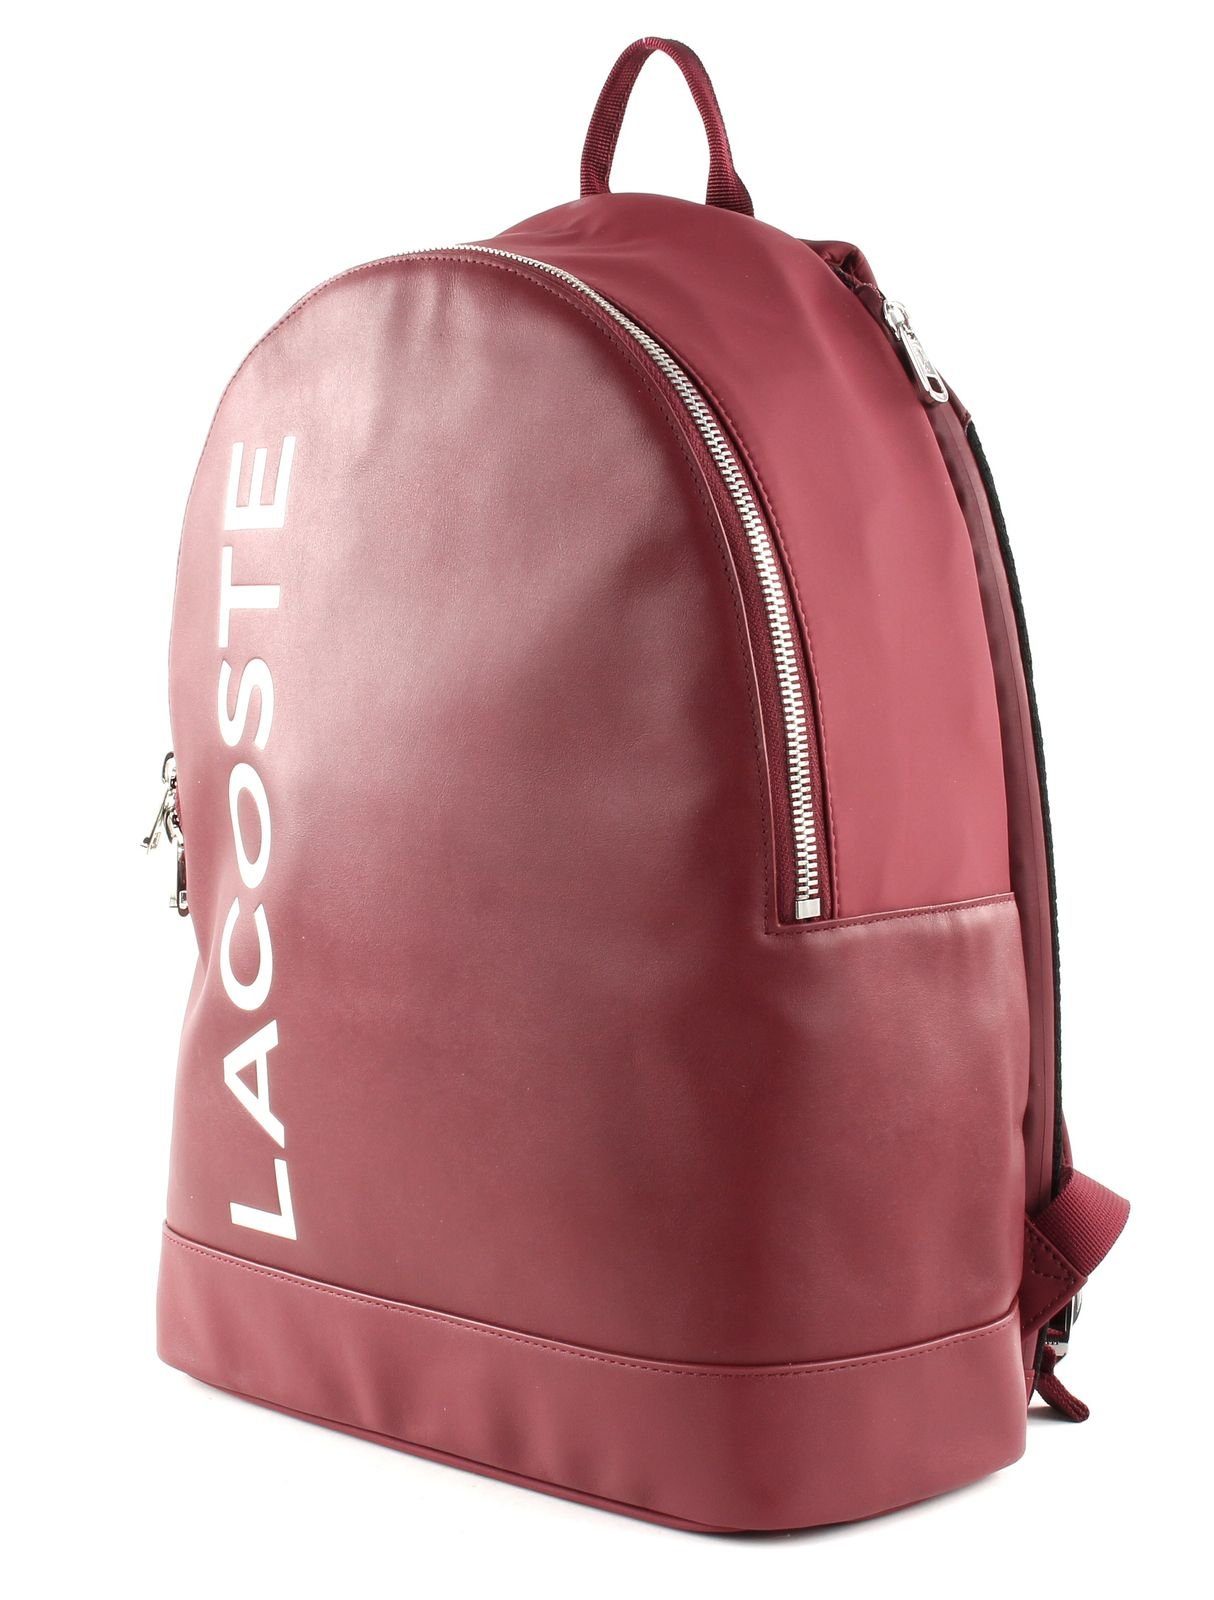 Cuir Rucksack Lacoste L.12.12 Animation